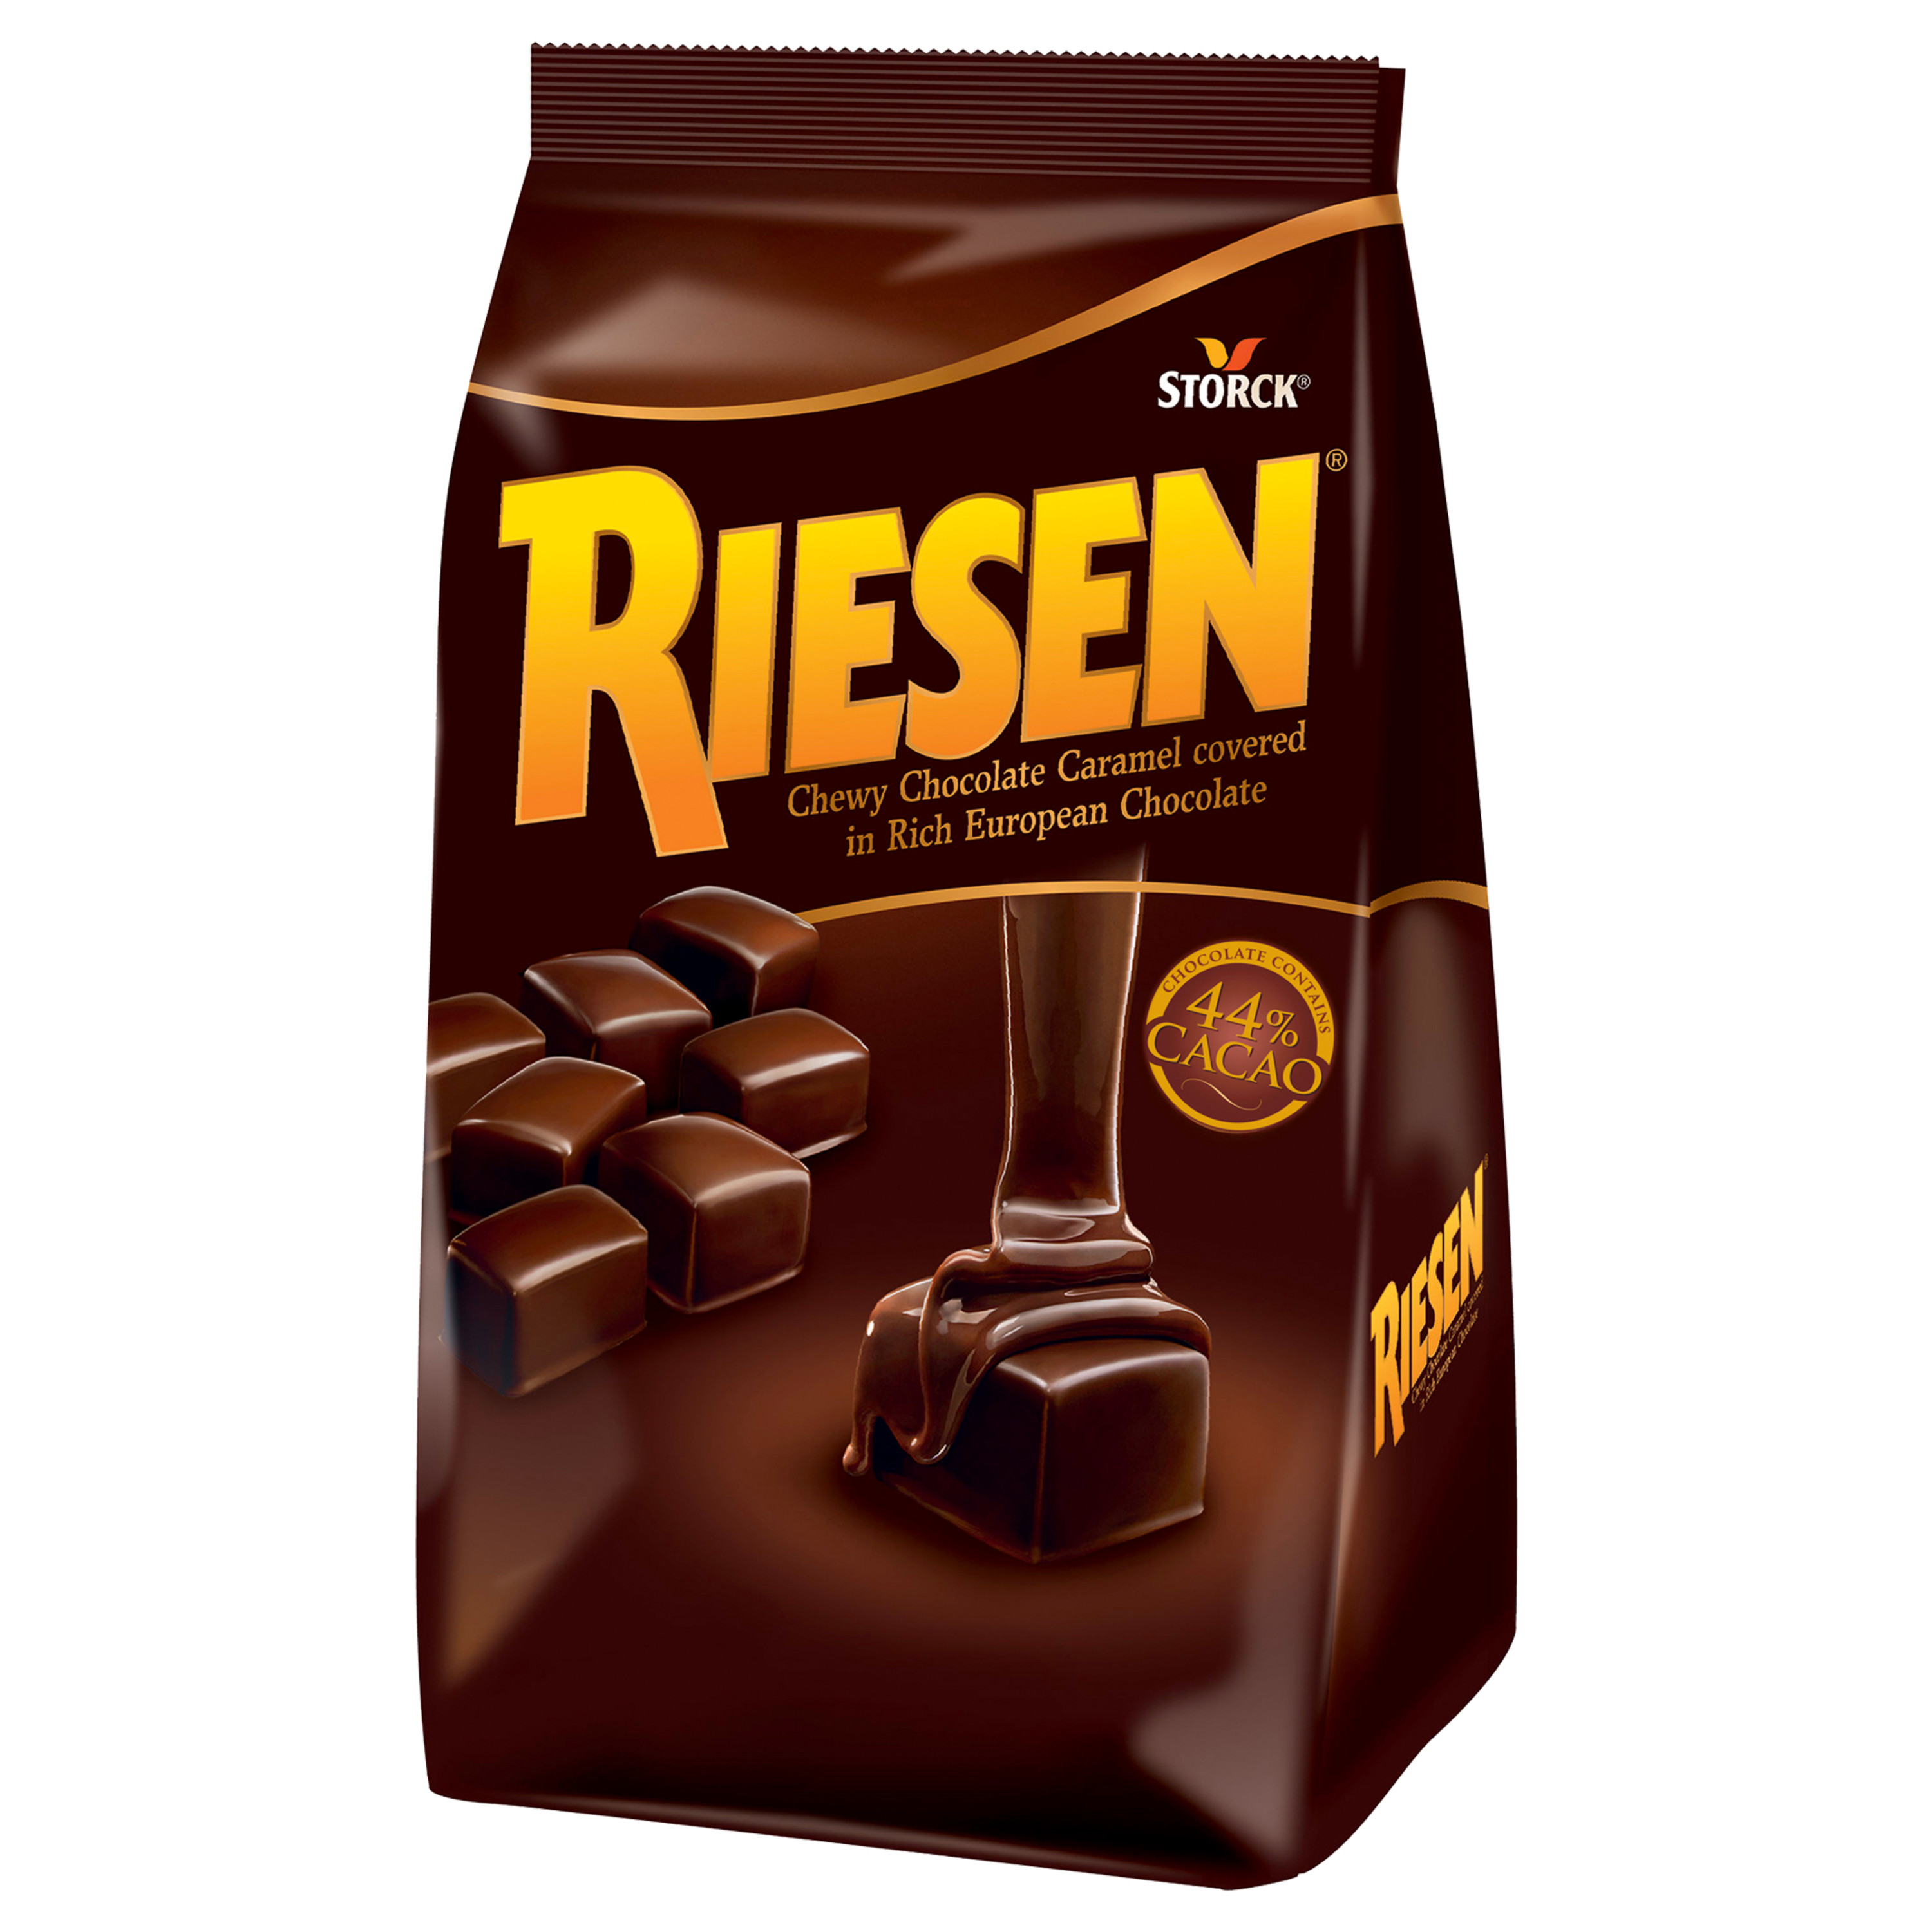 RIESEN Chewy Chocolate Covered Caramel Candy, 30 oz - image 5 of 7